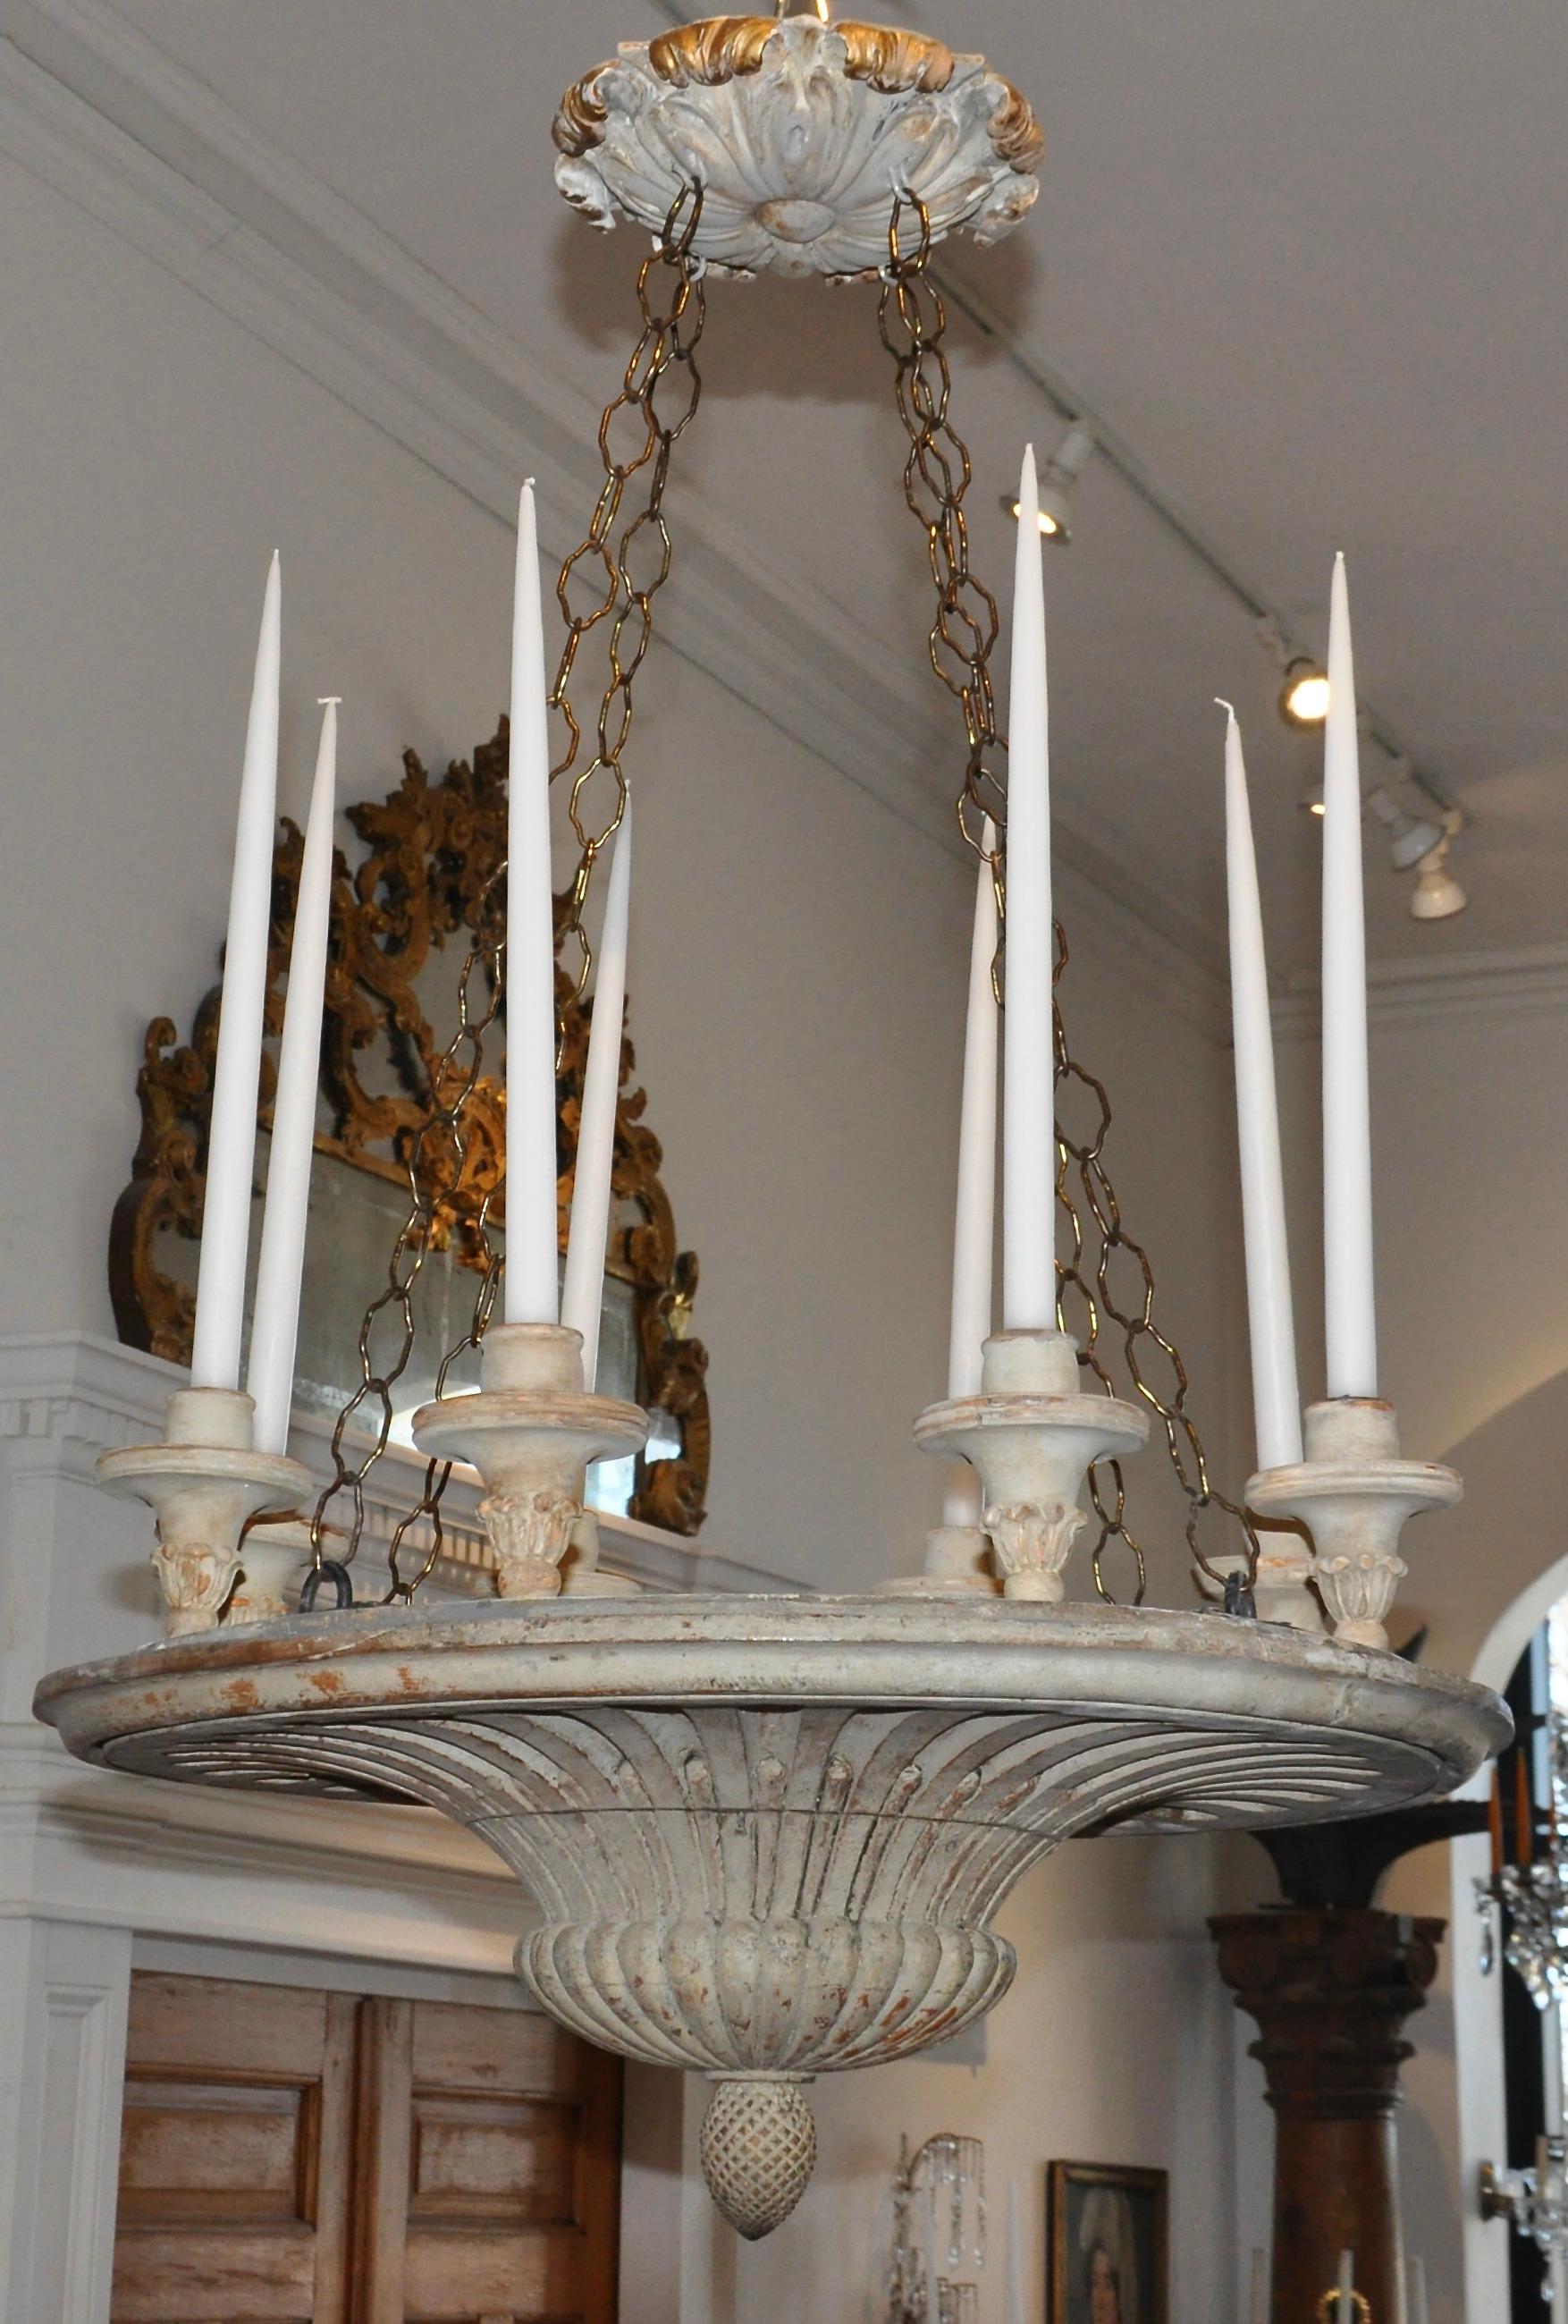 Period early 19th century Swedish painted wooden 8 light chandelier. Neoclassical bowl with 8 carved candle holders. Mostly retains original paint and color. Some minor refreshing. Great Patina. Rare and chic form